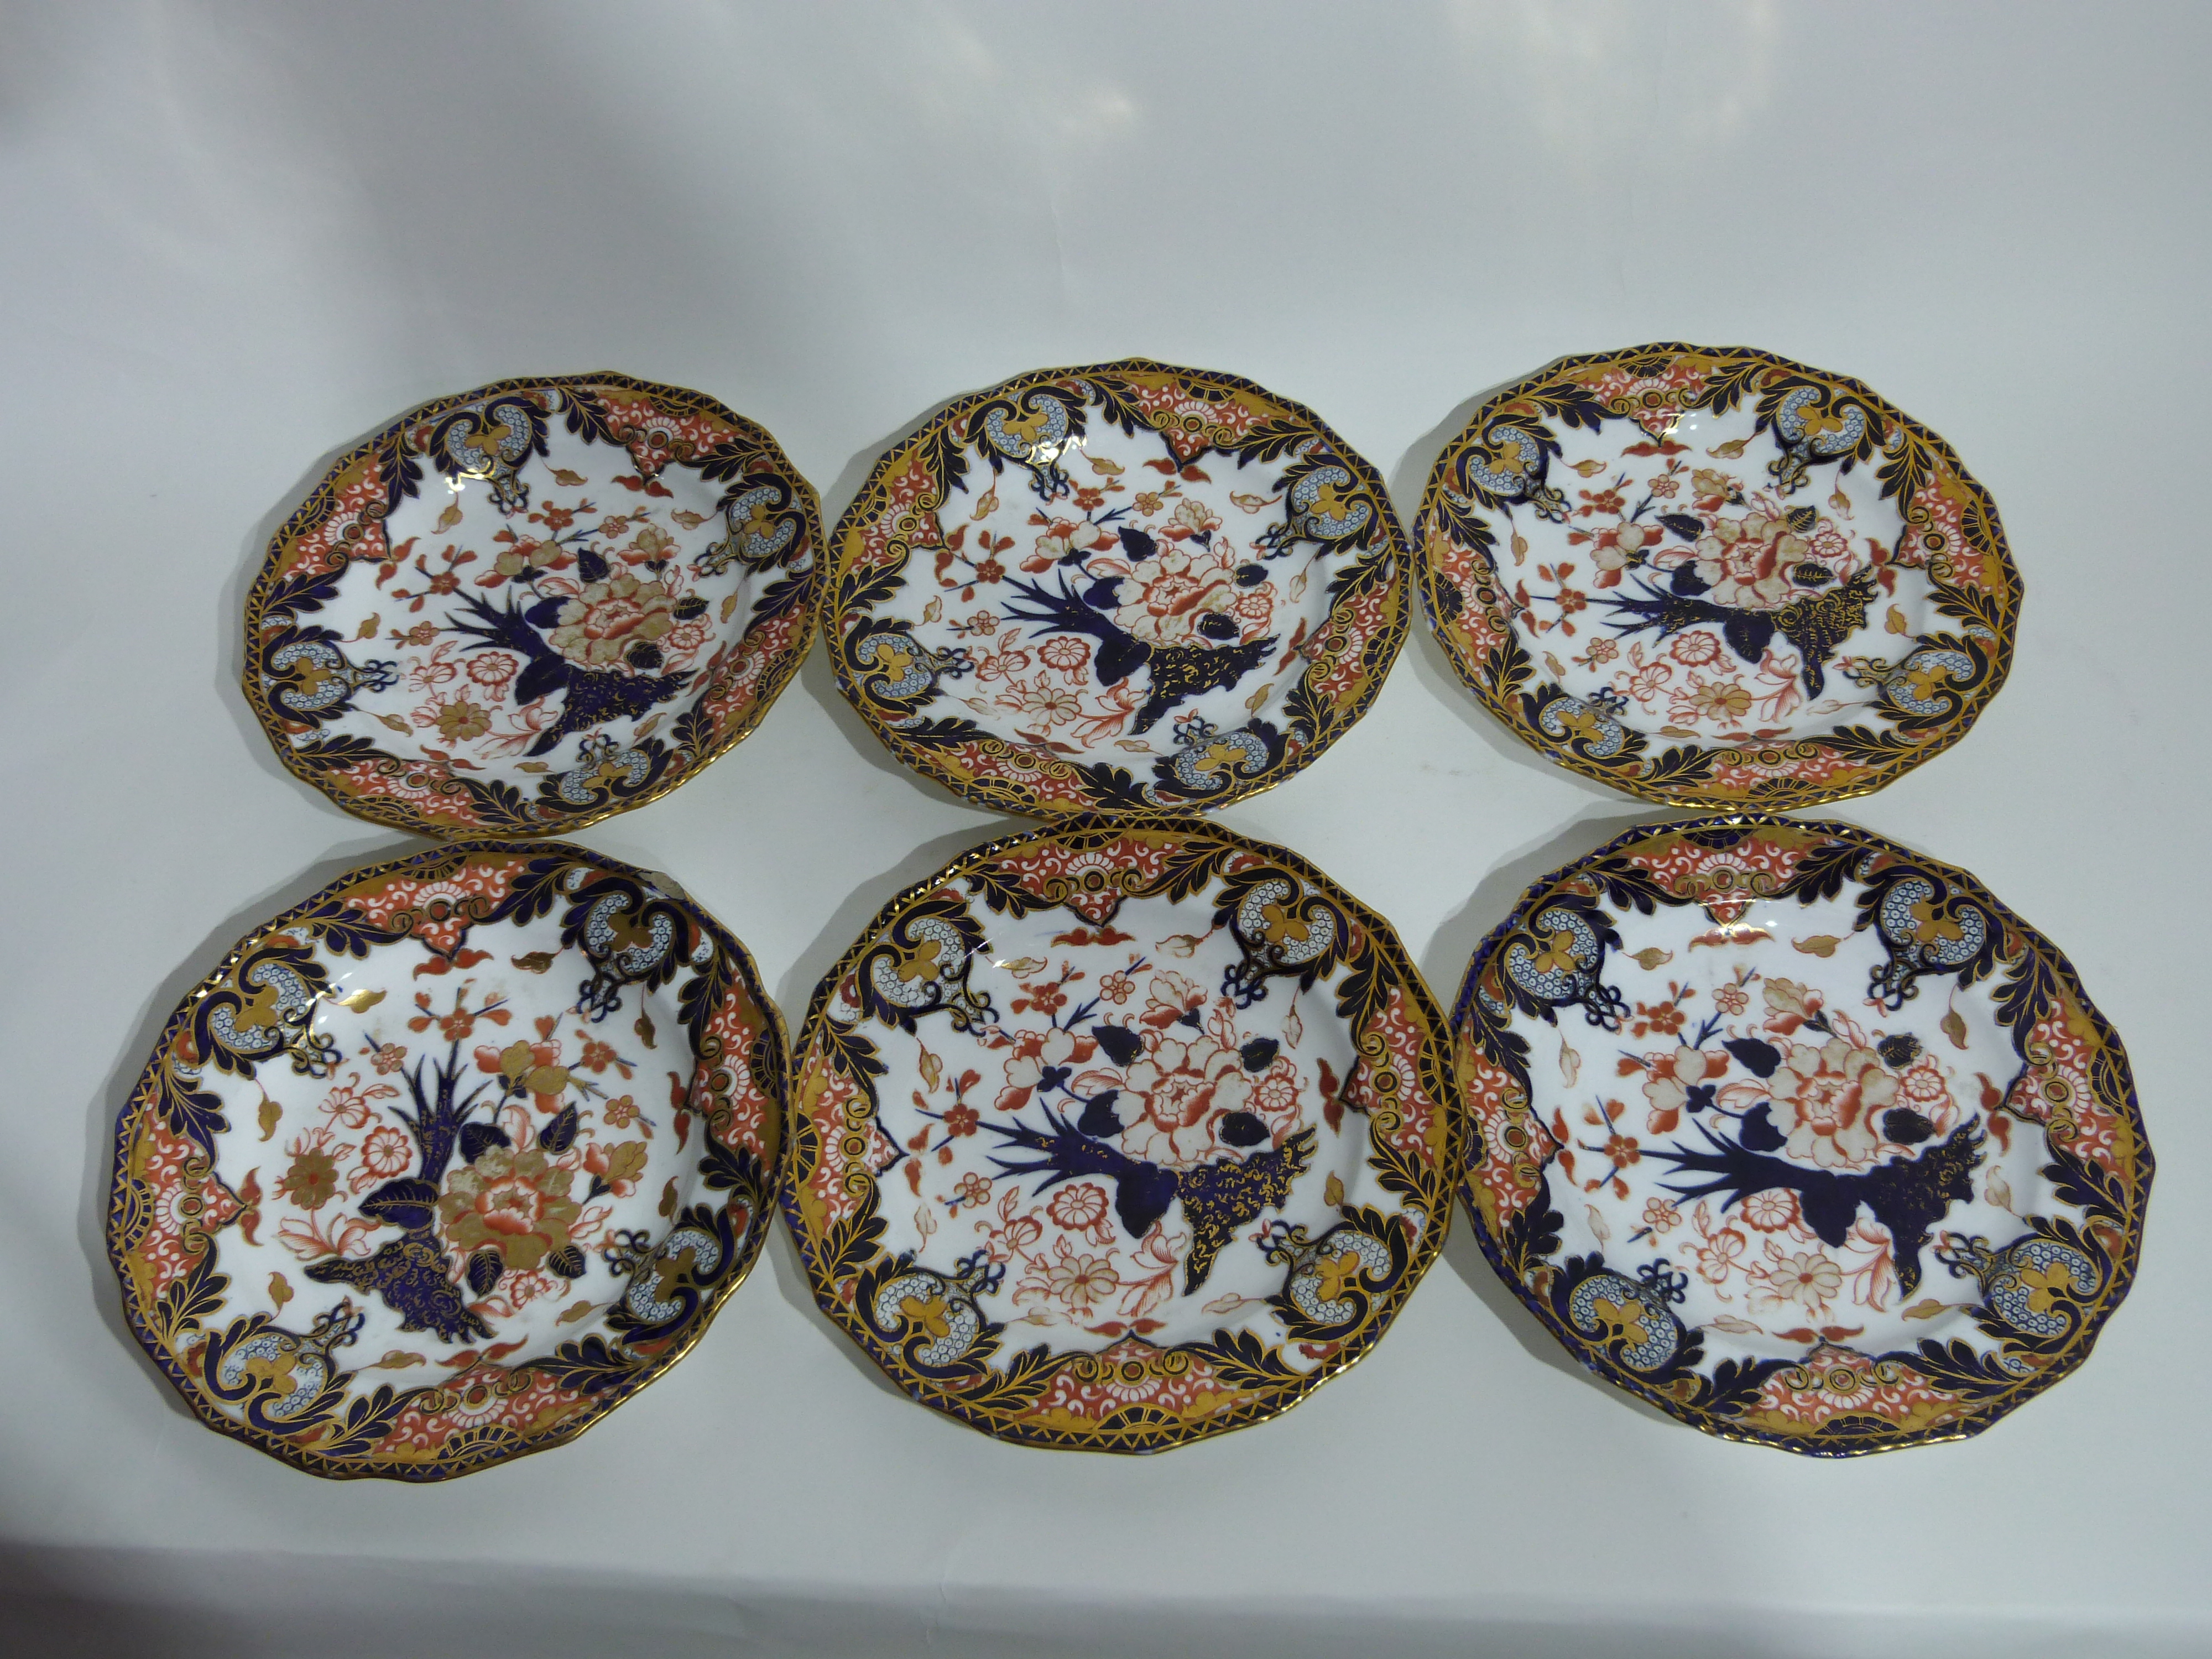 Set of 12 19th century Crown Derby plates all with typical Imari designs in blue, gilt and red,